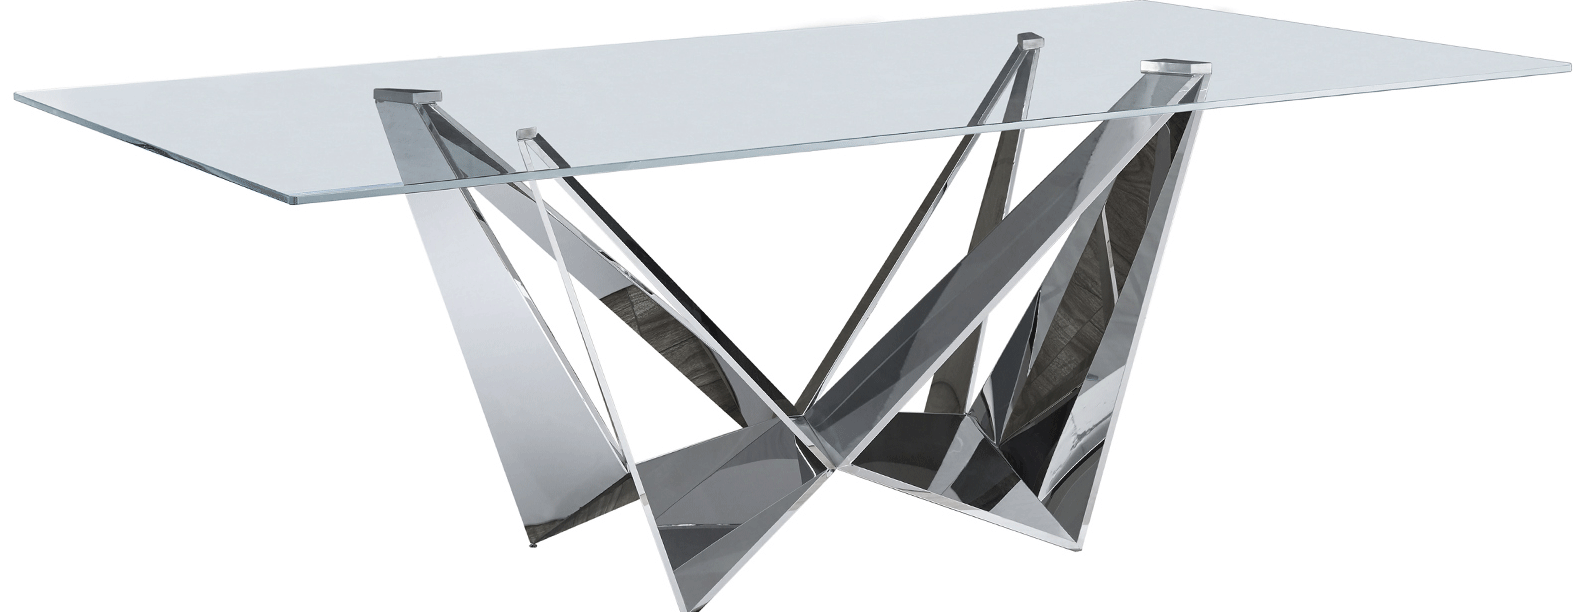 Dining Room Furniture Marble-Look Tables 2061 Table